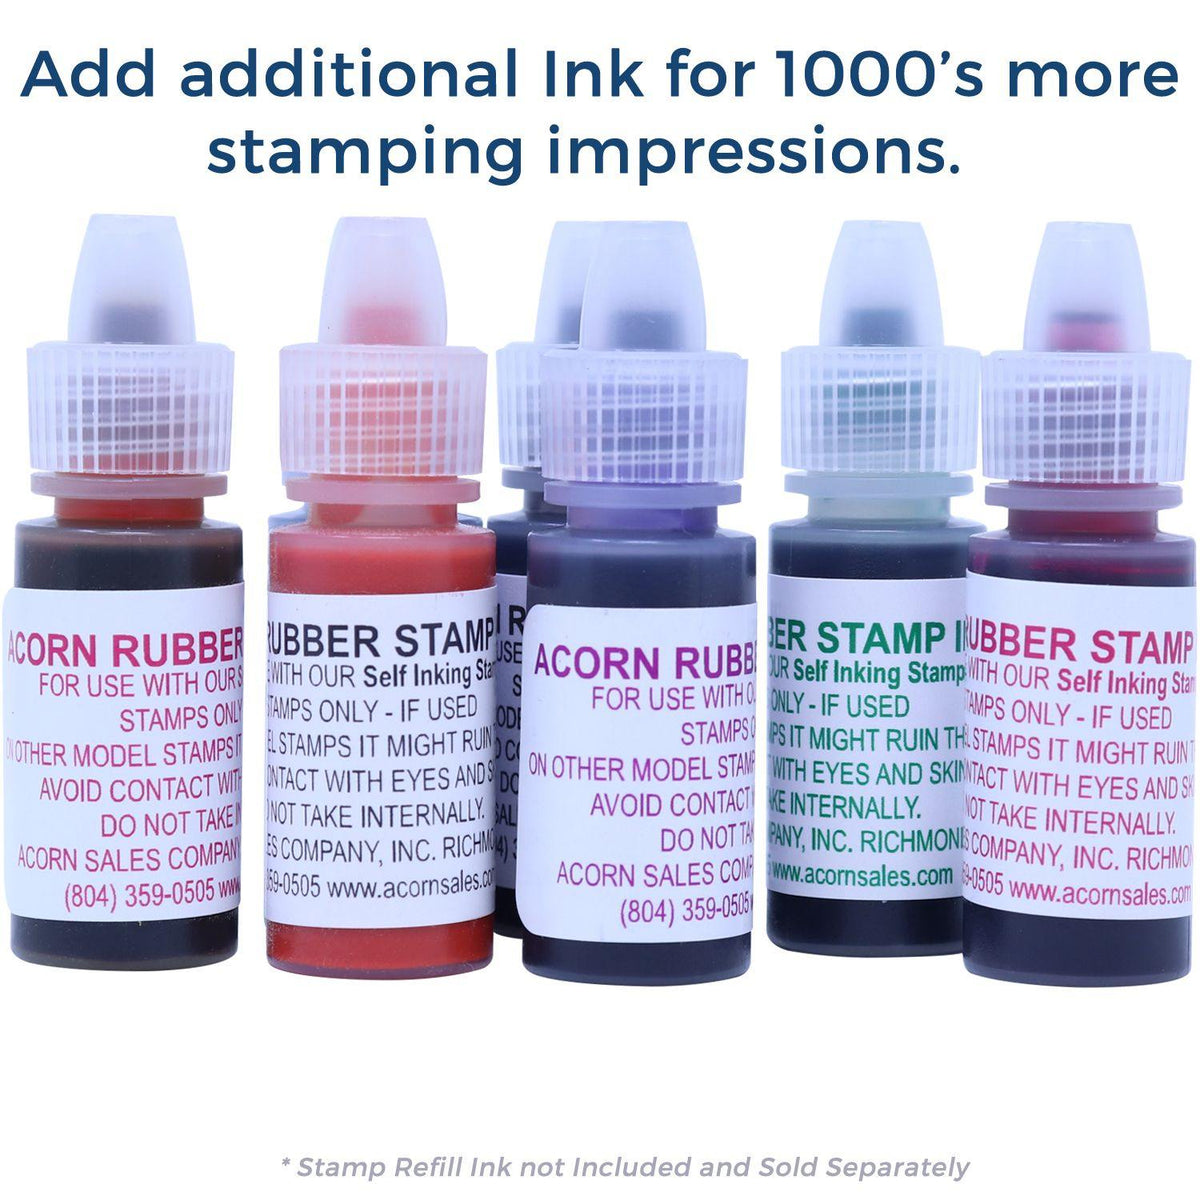 Refill Inks for Large Pre-Inked Asymptomatic Stamp Available